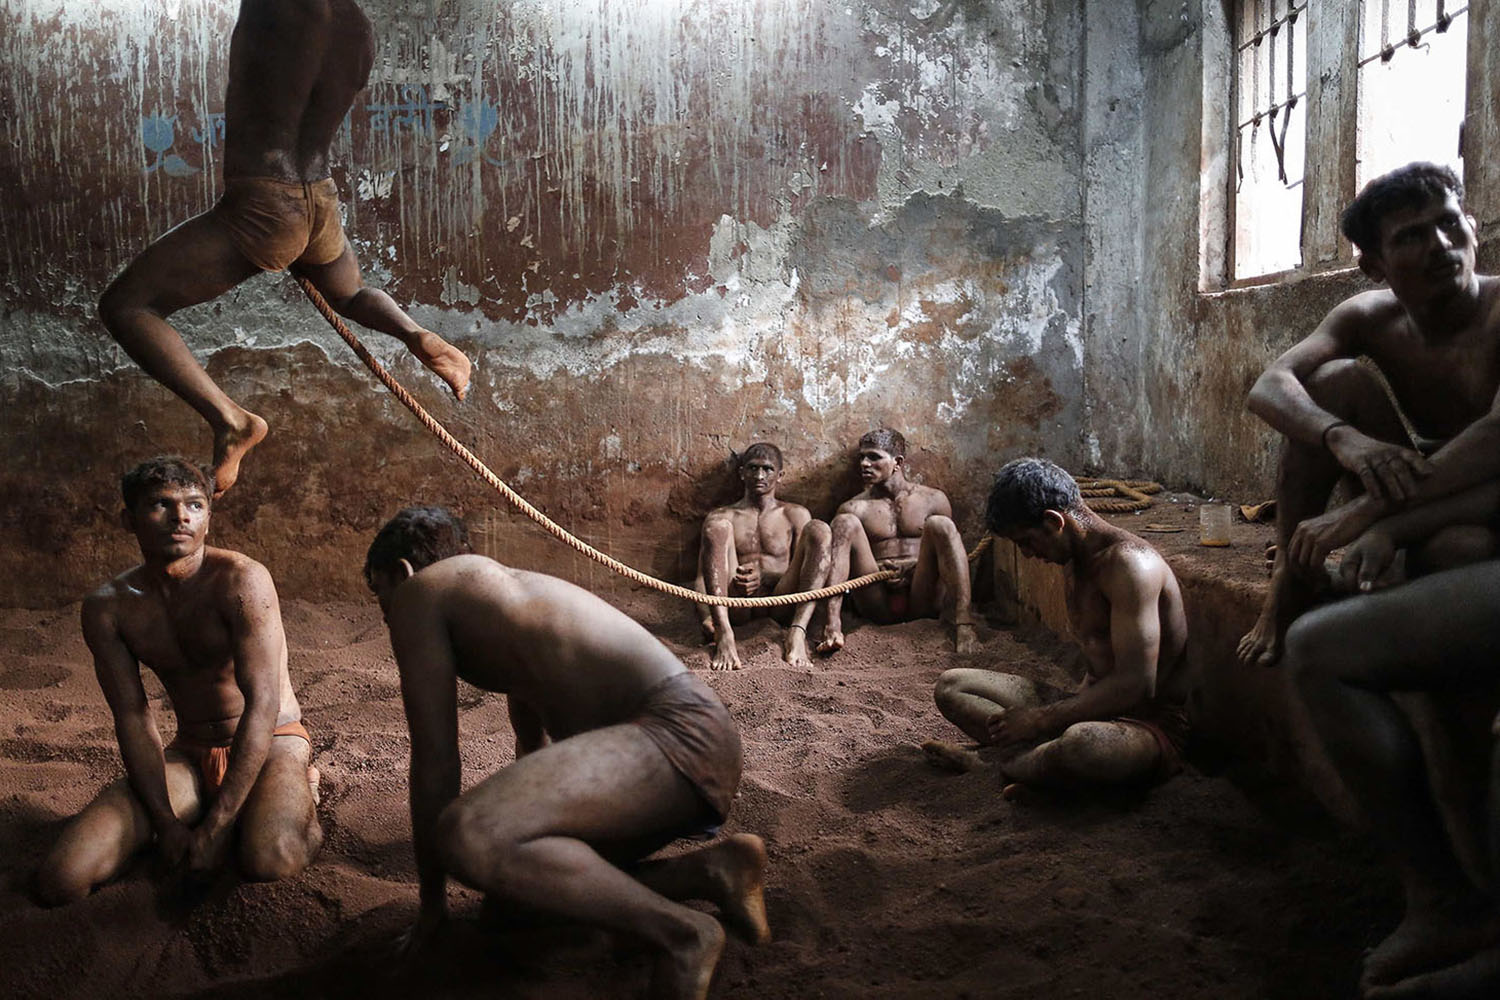 Mar. 4, 2014. Wrestlers practice as others rest in the mud at a traditional Indian wrestling center in Mumbai.